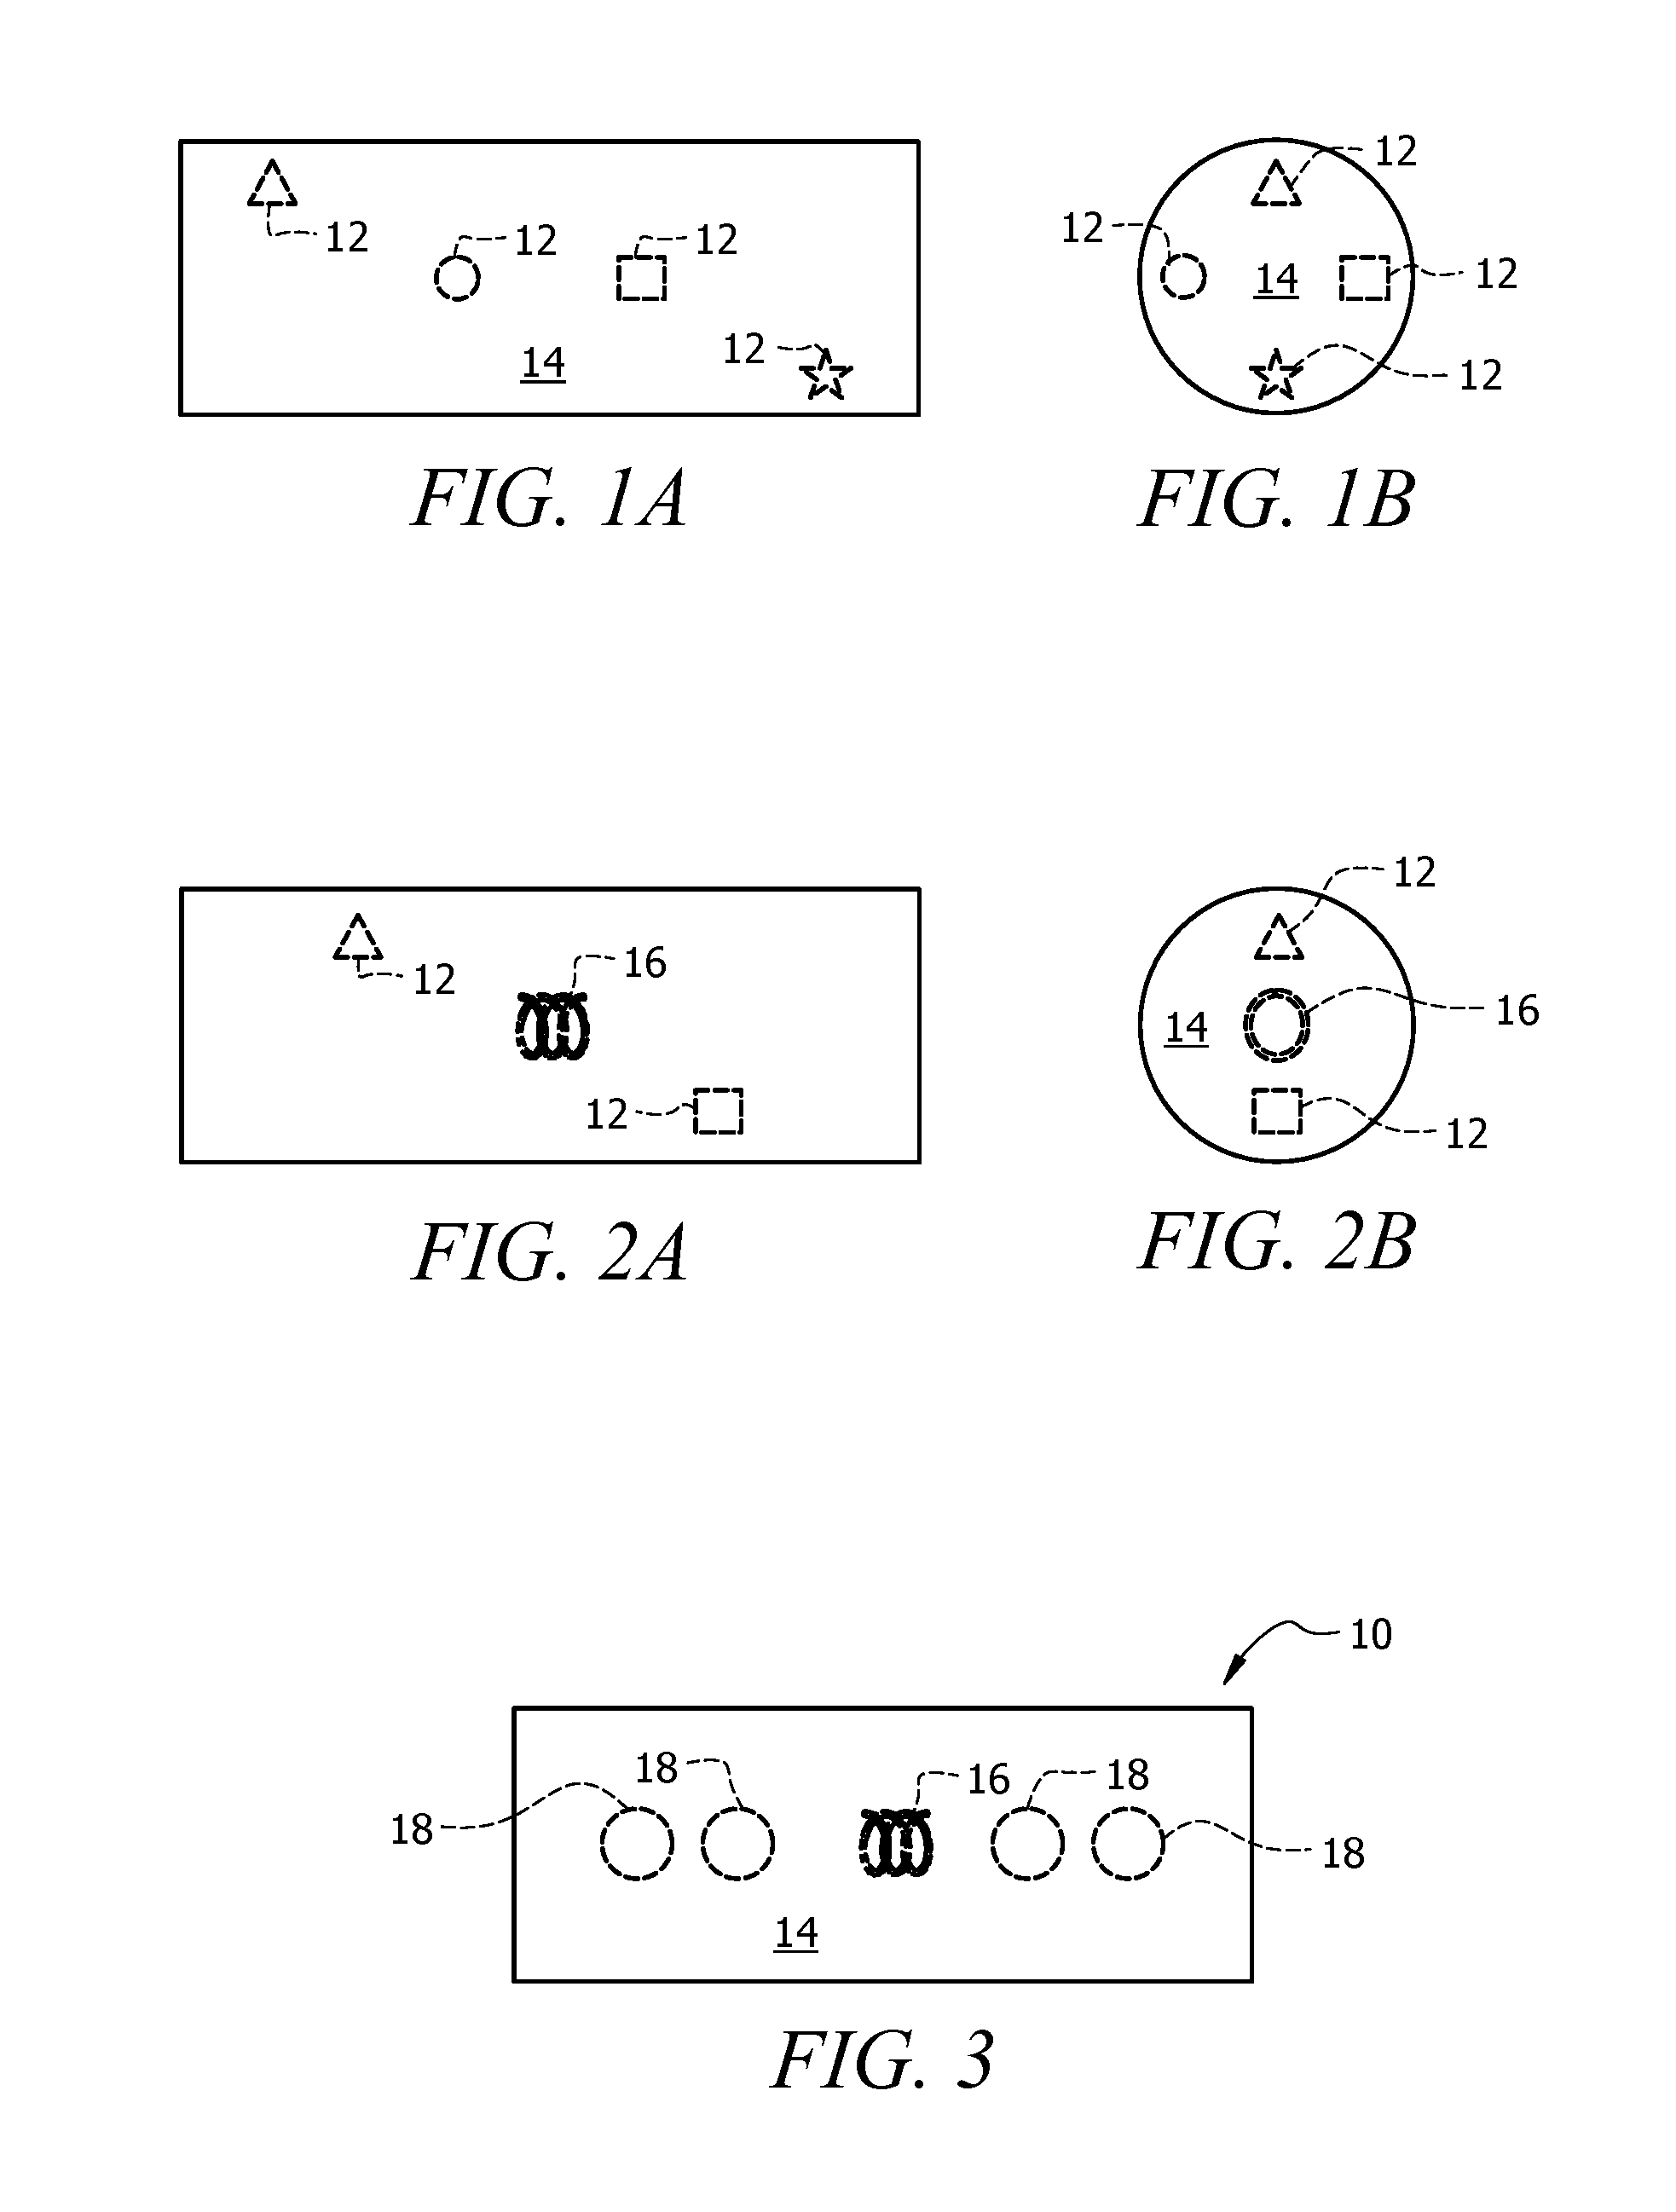 Method of Enhancing Ultrasound Visibility of Hyperechoic Materials